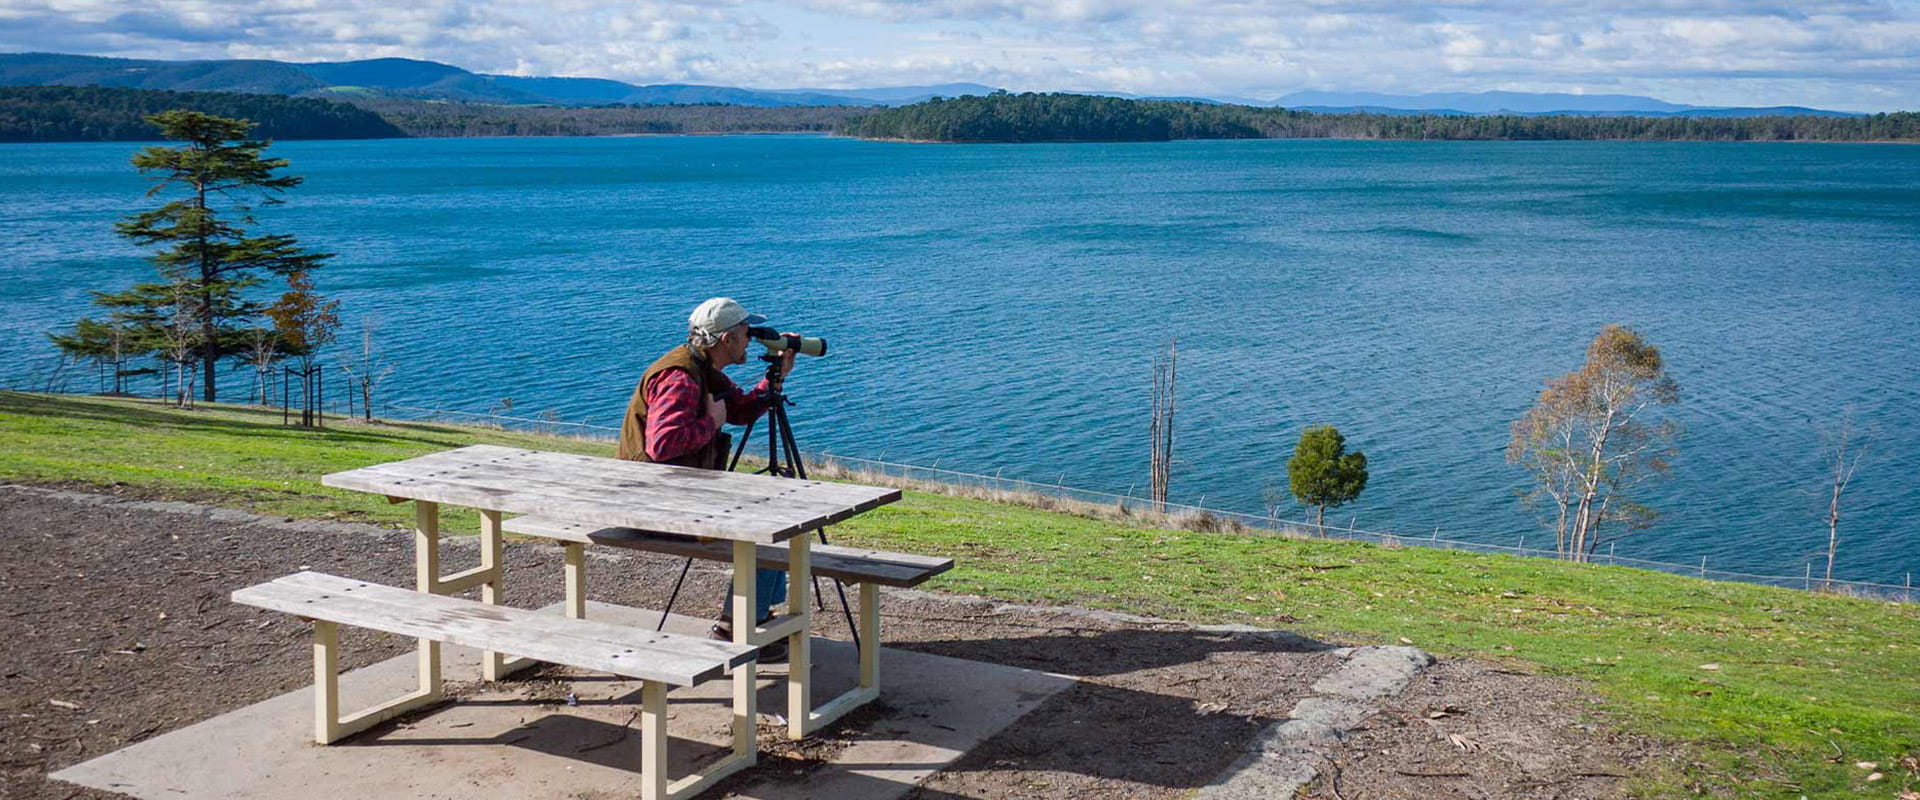 A man sits on a picnic table with a binocular looking at the wildlife across the reservoir.